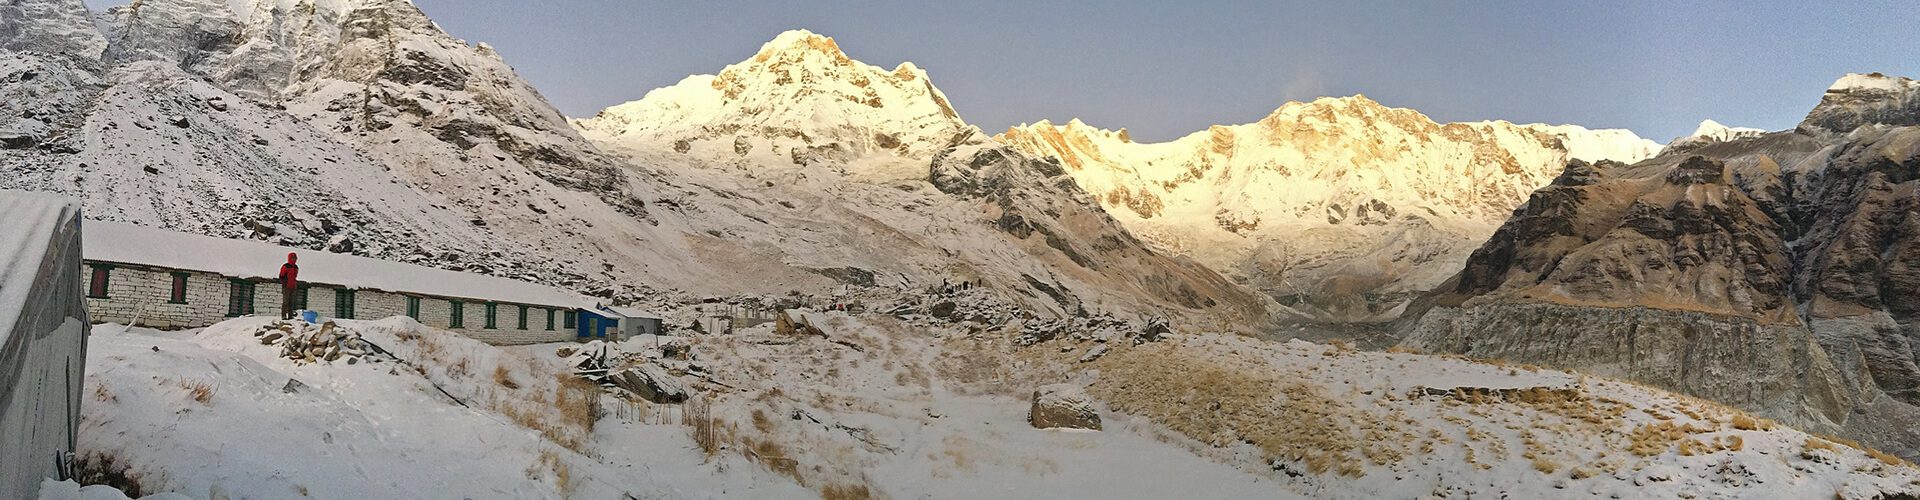 When is the best time for Annapurna Base Camp Trek?